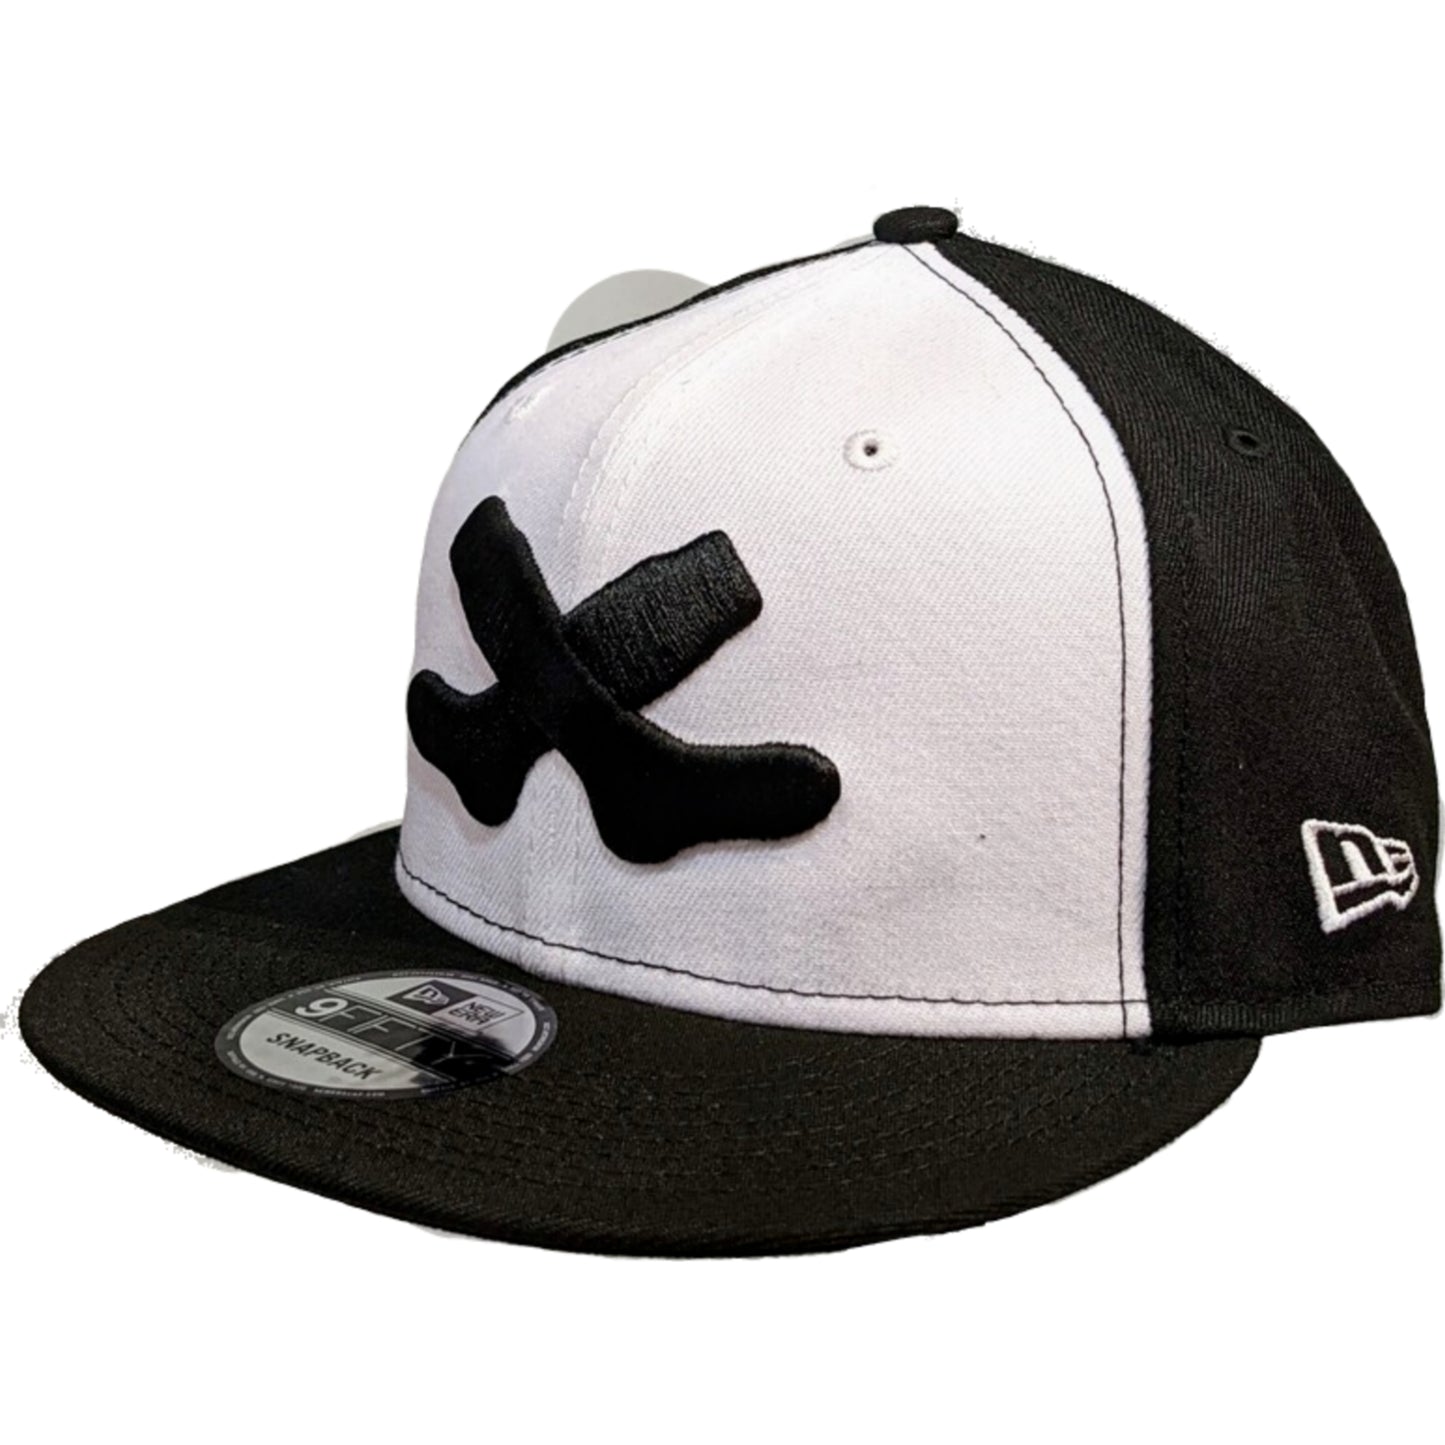 Mens Chicago White Sox New Era Black and White Cooperstown Collection 1926 Cross Socks 9FIFTY Side Patch Snapback Hat